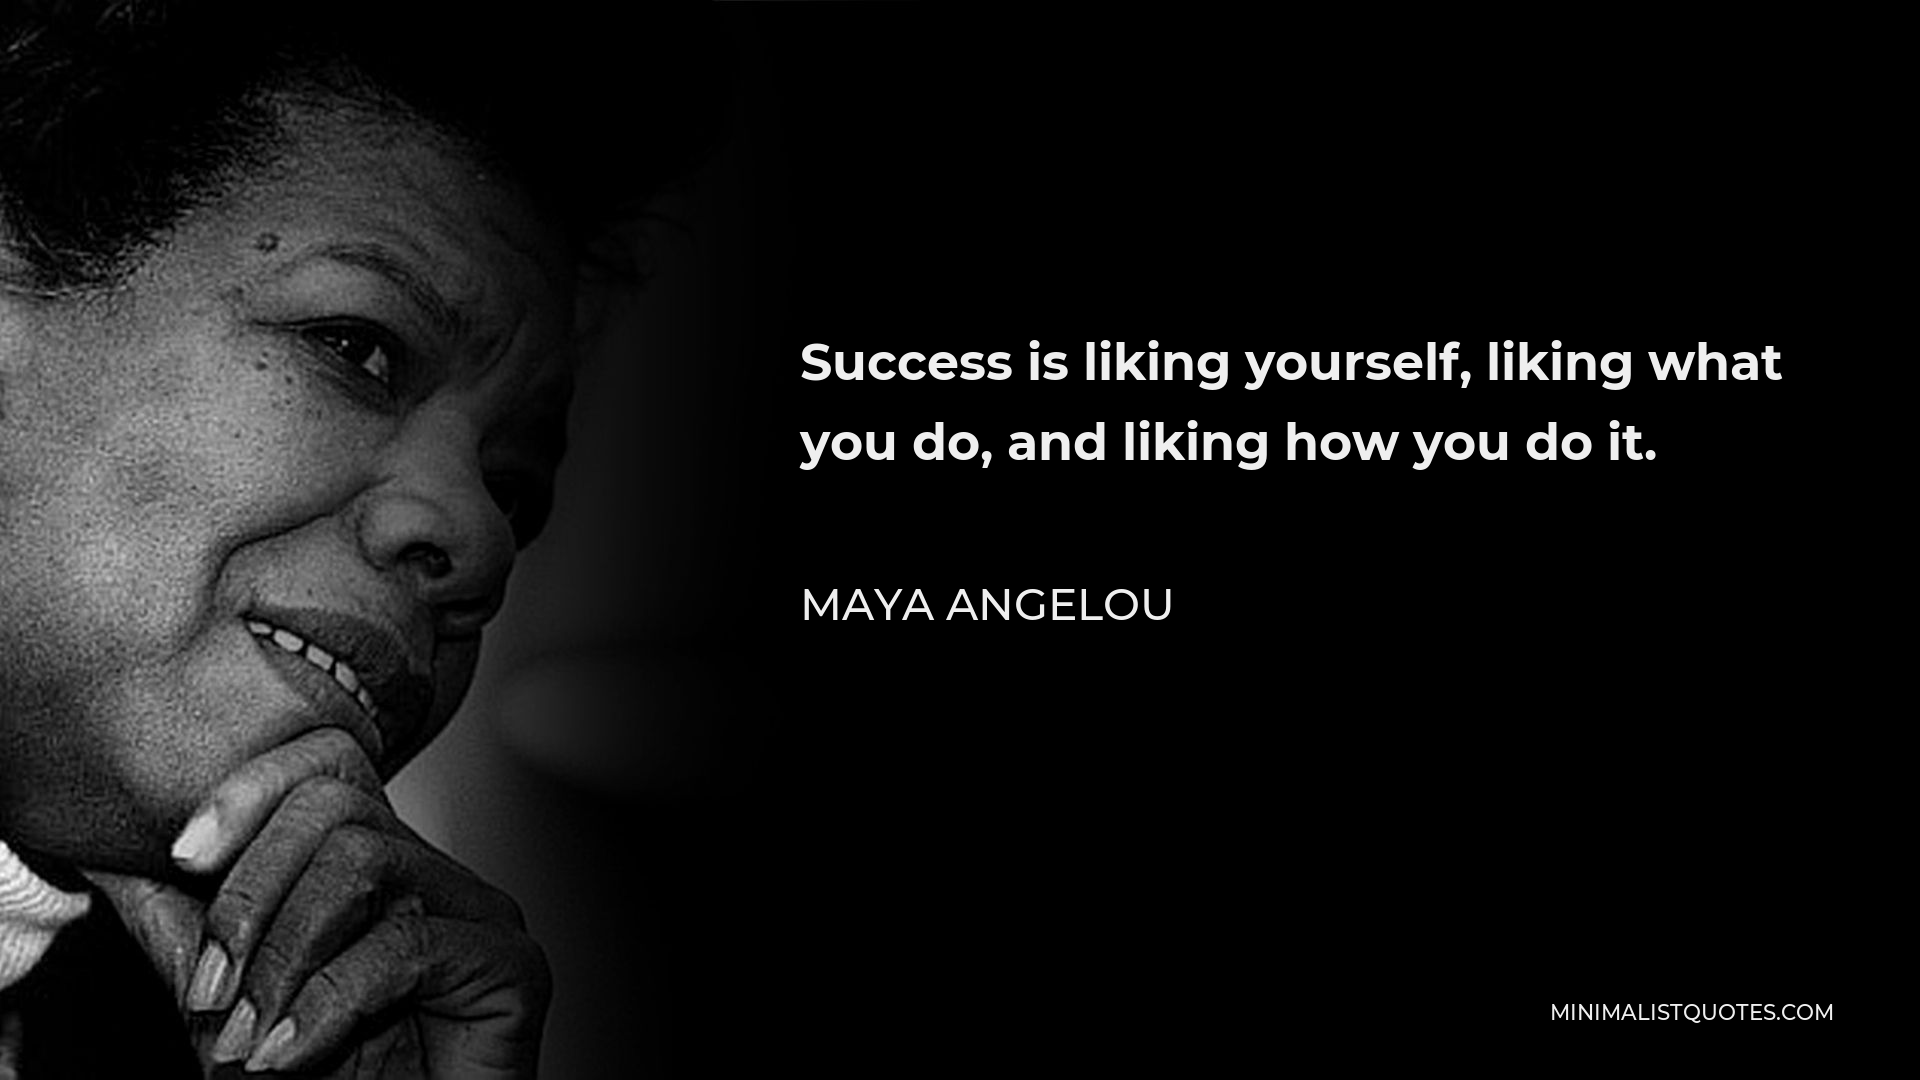 Maya Angelou Quote - Success is liking yourself, liking what you do, and liking how you do it.